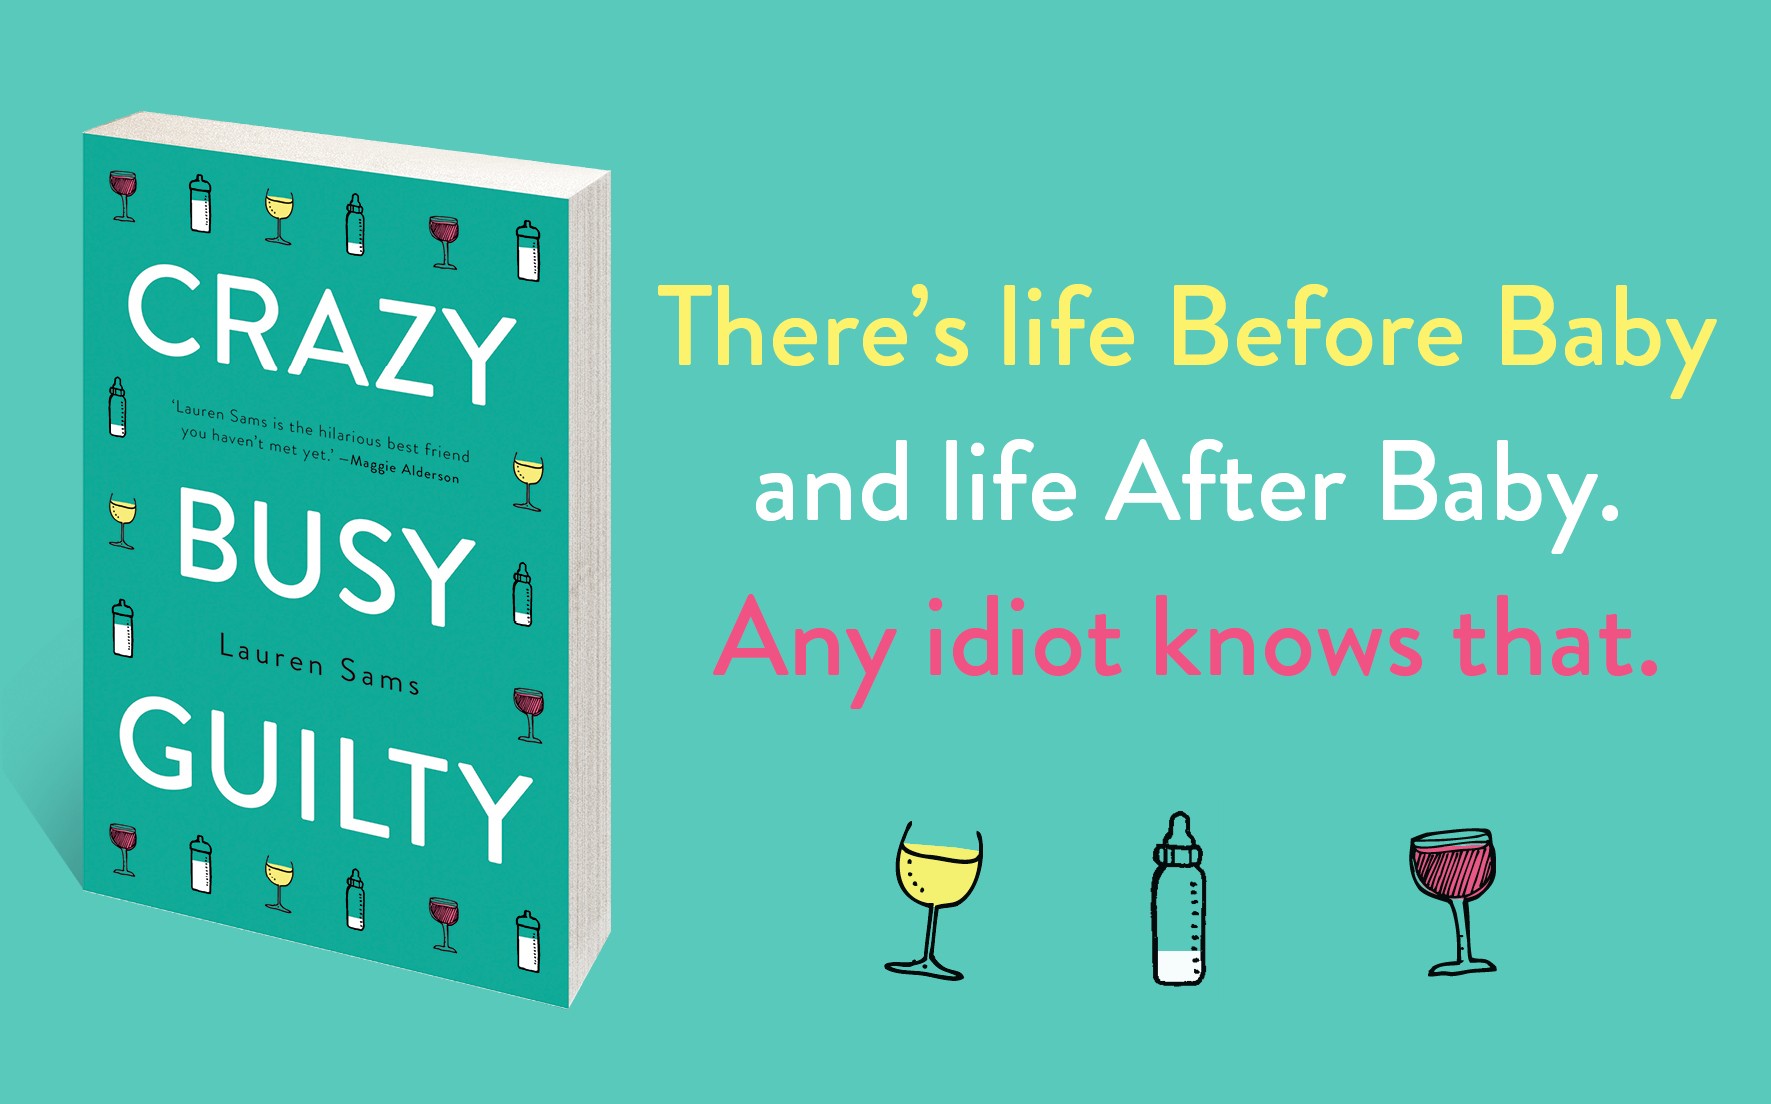 Read an extract from Crazy, Busy, Guilty by Lauren Sams